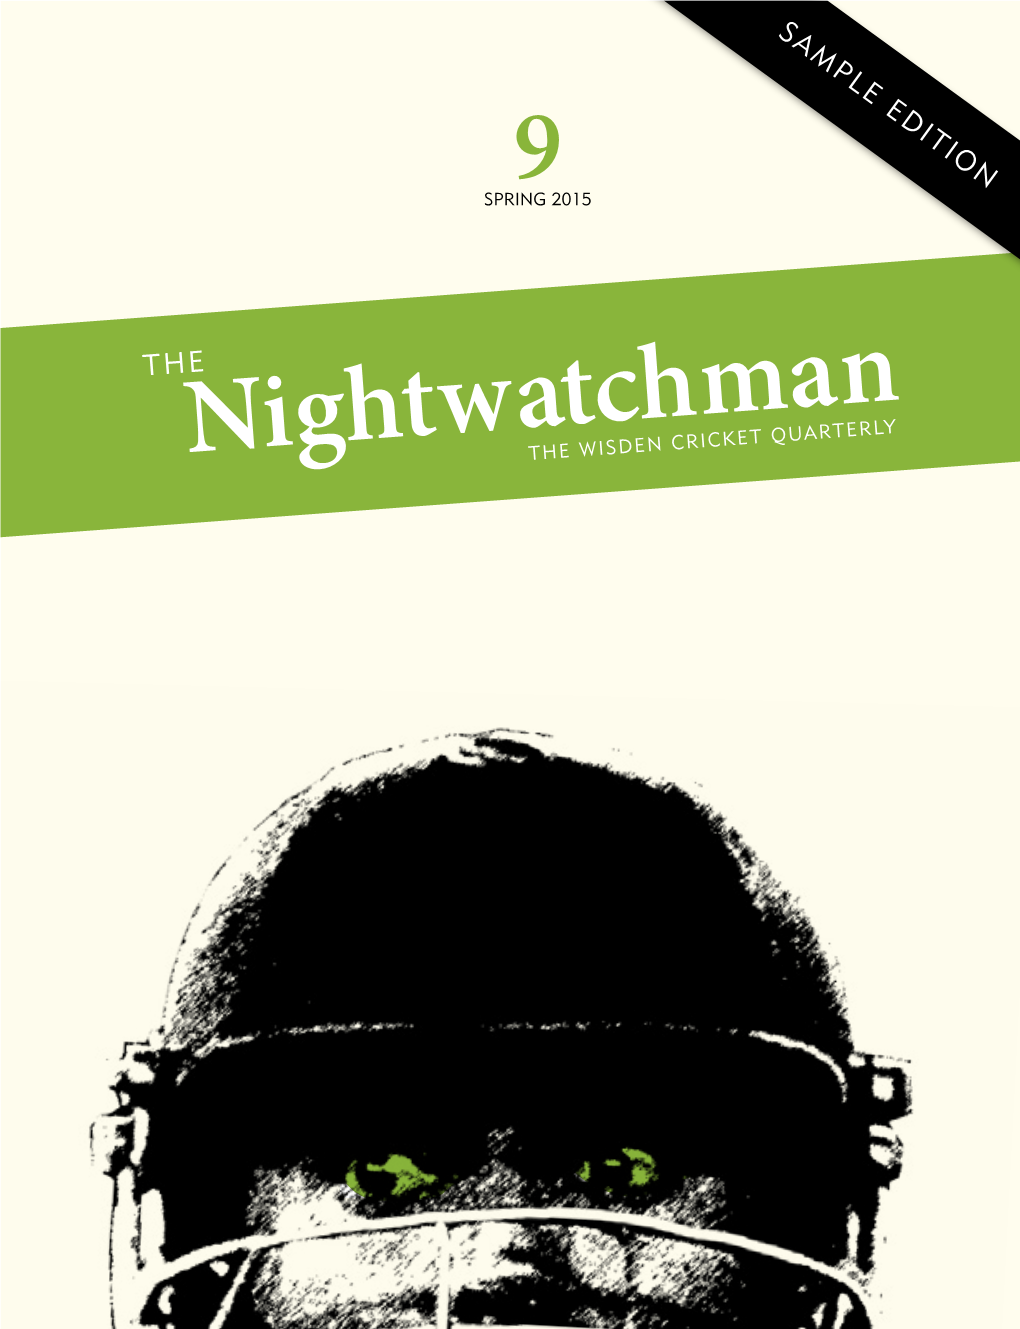 The Nightwatchman Is a Quarterly Collection of Essays and Long-Form Articles and Is Available in Print and E-Book Formats